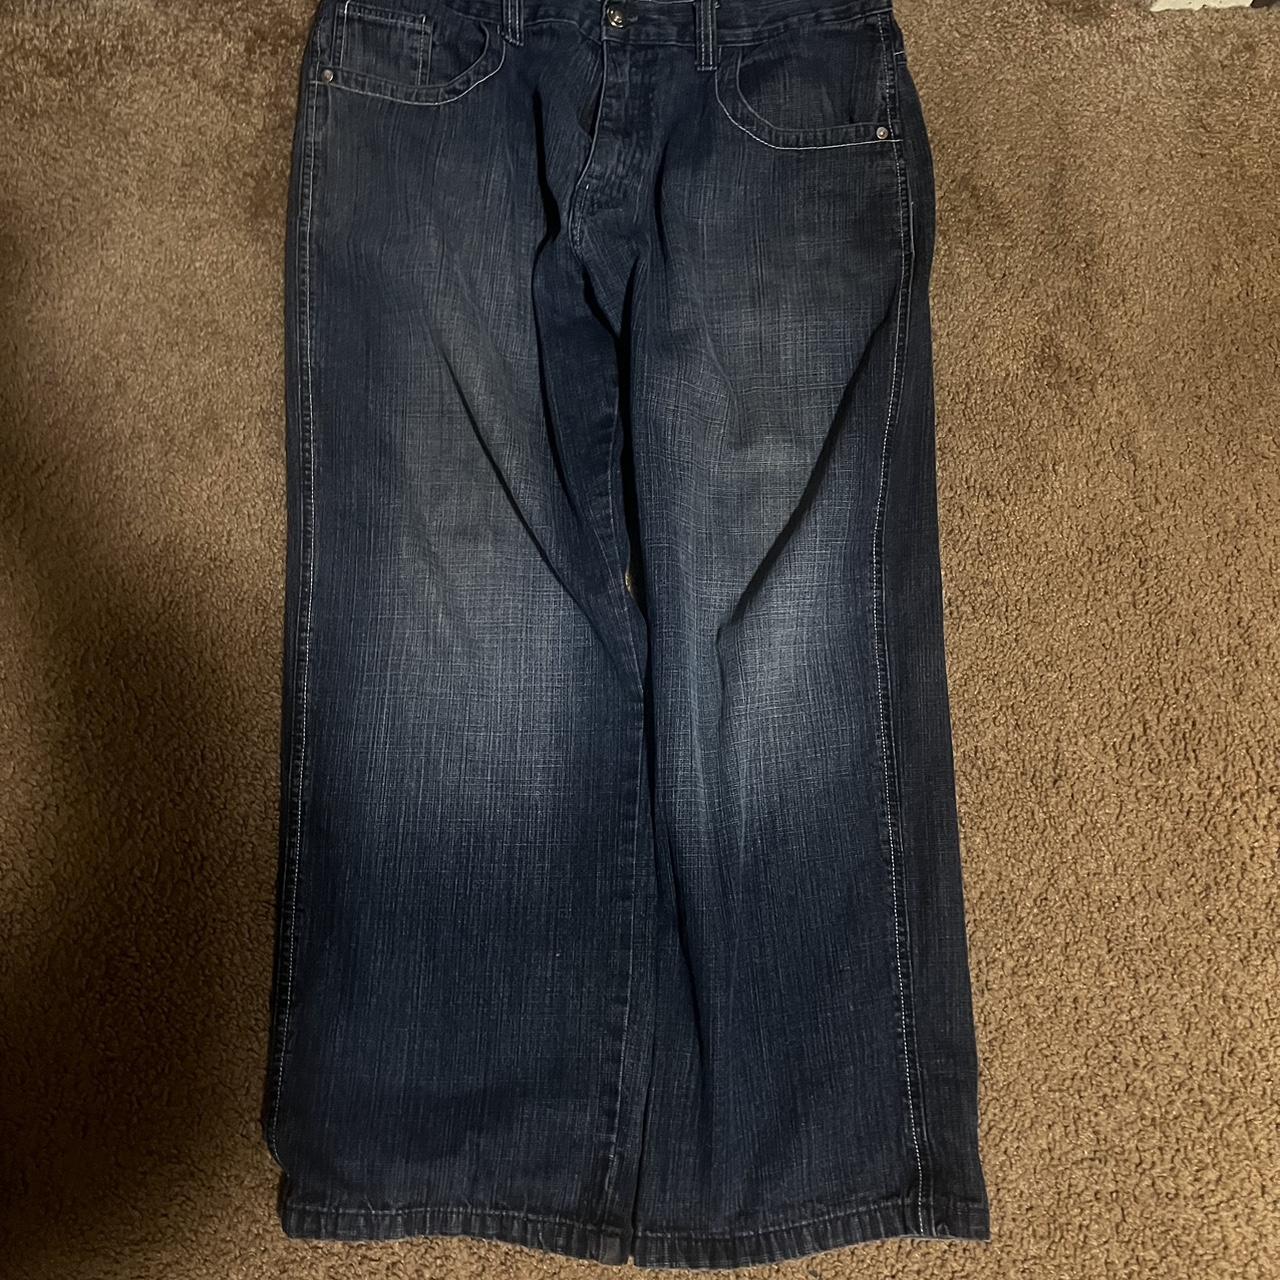 Dodeca jeans look like south pole jeans Really... - Depop